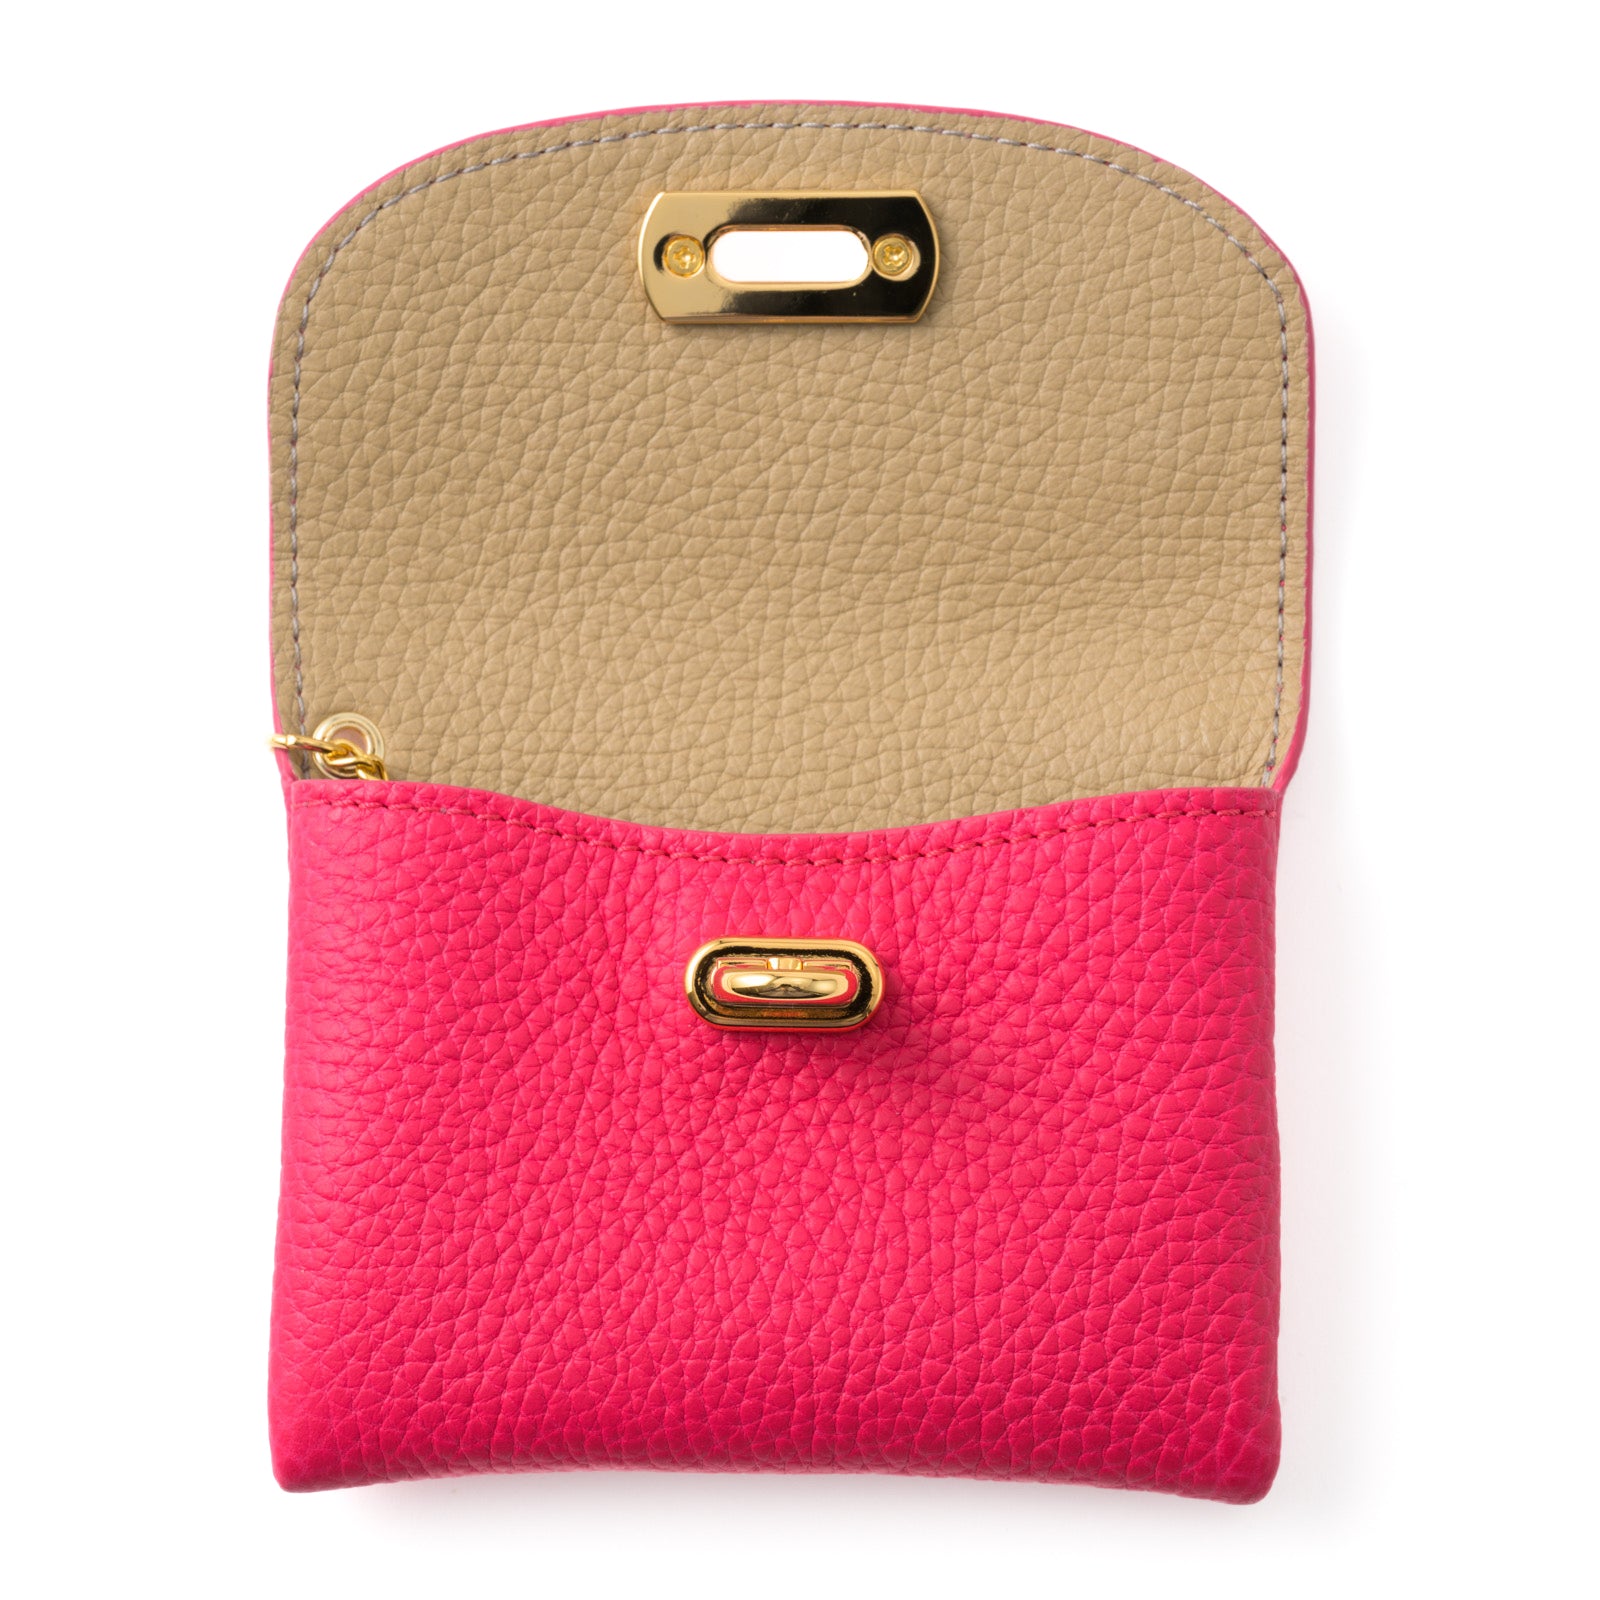 Leather flap smart key case / Taurillon Clemence